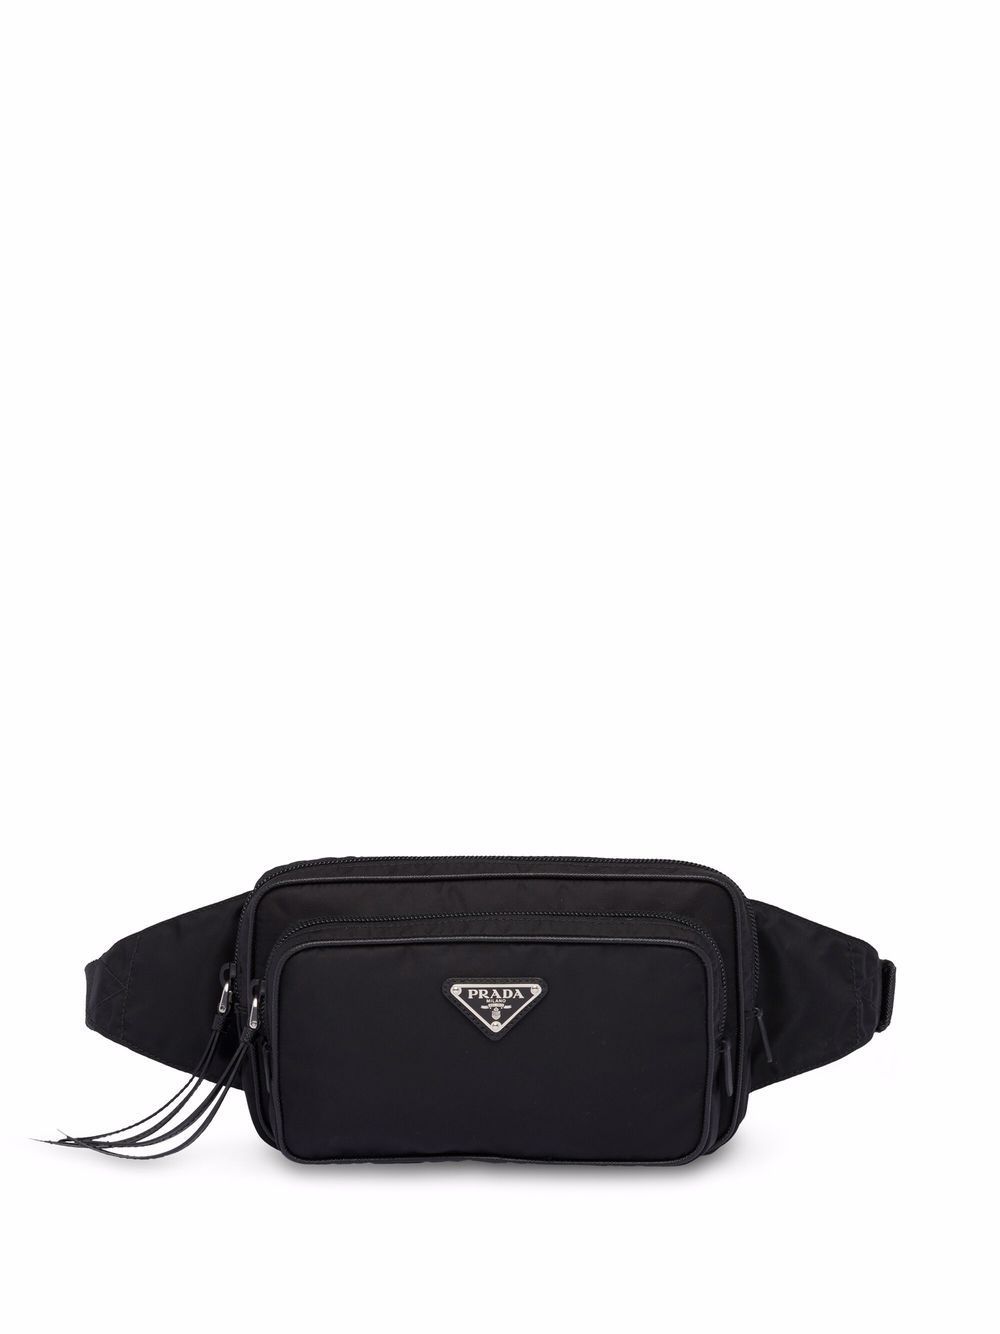 <p><strong>$1850.00</strong></p><p>Those who prefer an everyday style should consider a water-wicking nylon, which is used often for more casual Prada bags. This logo belt bag will withstand unexpected weather conditions and you won't have to worry about the natural wear and tear that comes with wearing a bag every day. And while it's sporty by nature, it can easily be dressed up with a leather trench and slacks for a polished, off-duty look.</p><p><strong>Size:</strong> 4.9 "H x 8.26" W x 1.77" L </p><p><strong>Material: </strong>Nylon</p><p><strong>Colors:</strong> Black </p>